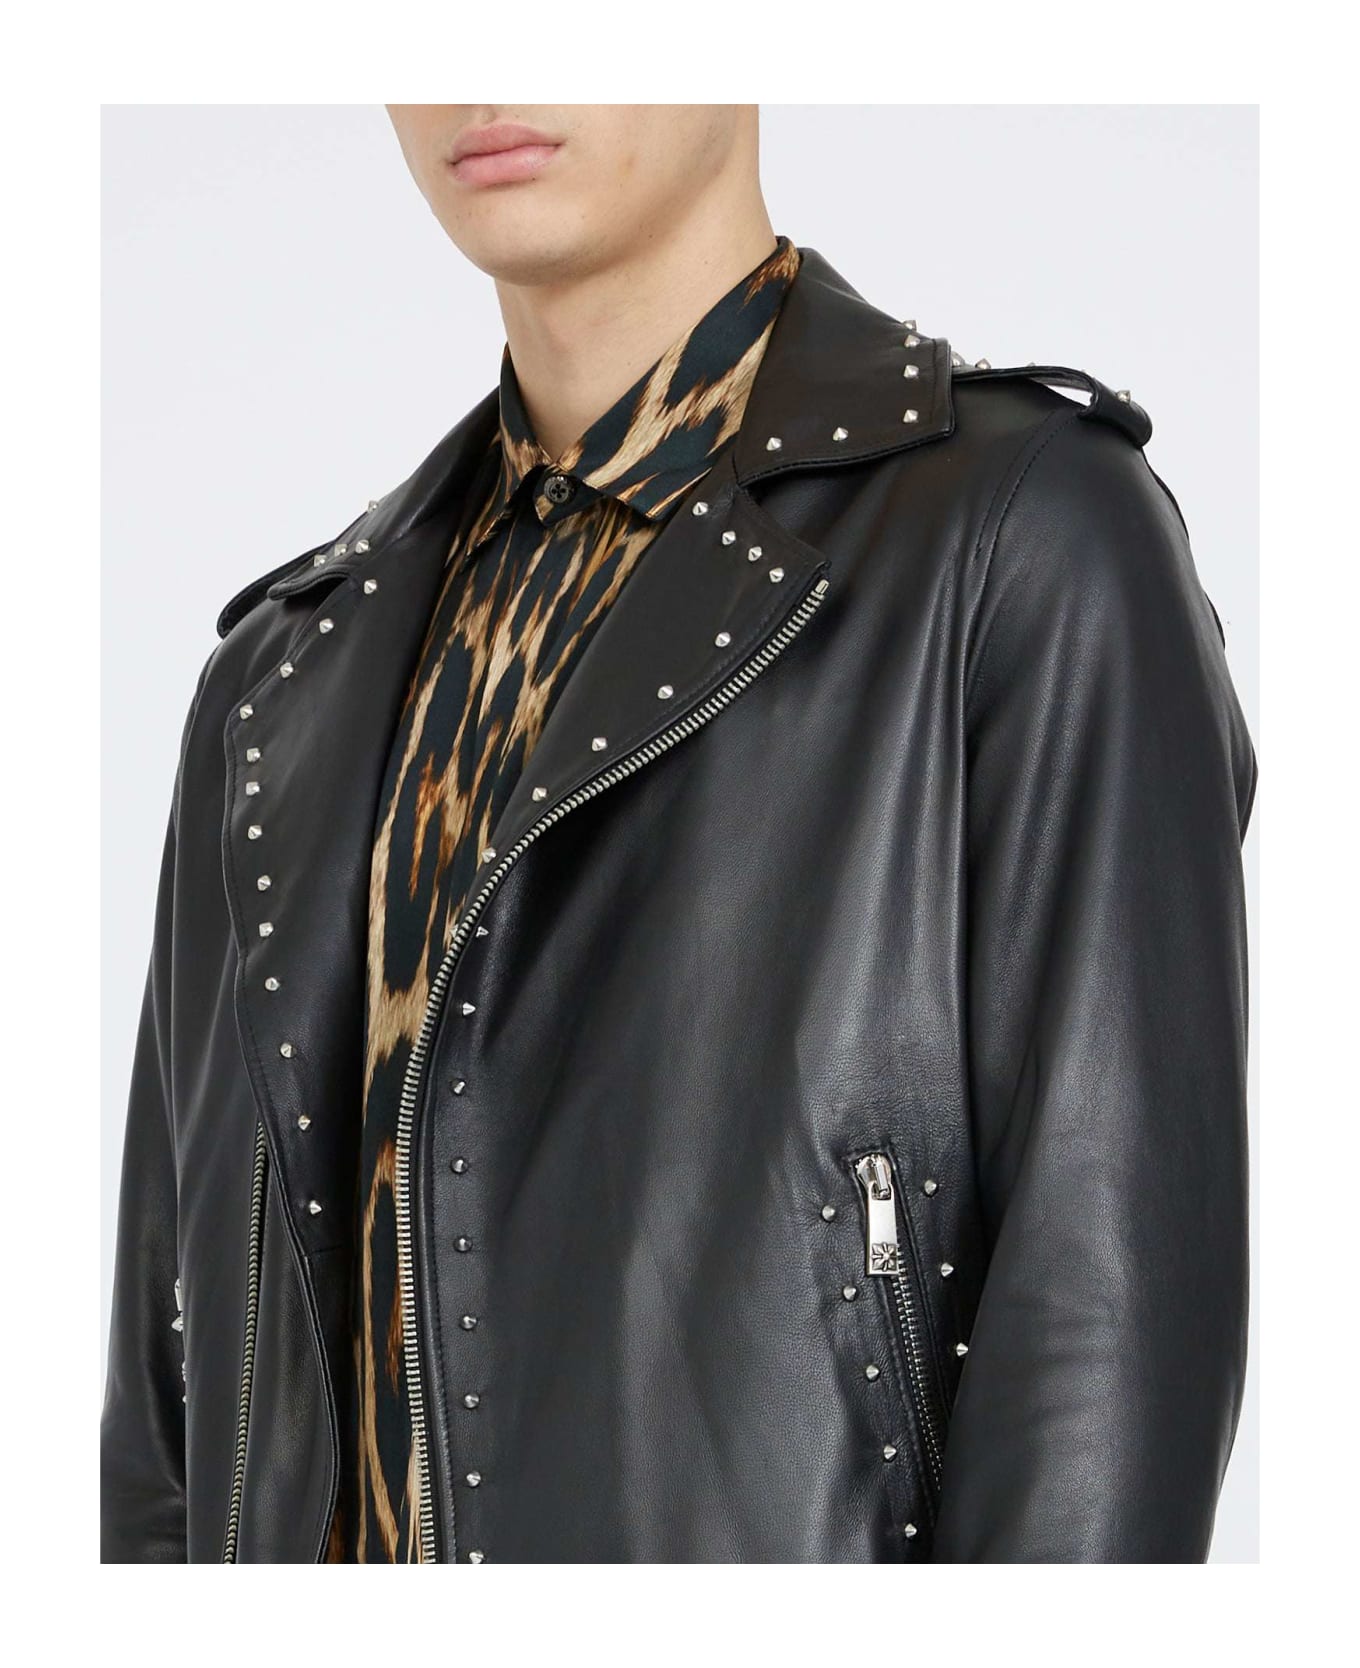 John Richmond Leather Jacket With Applications On The Back - Nero レザージャケット